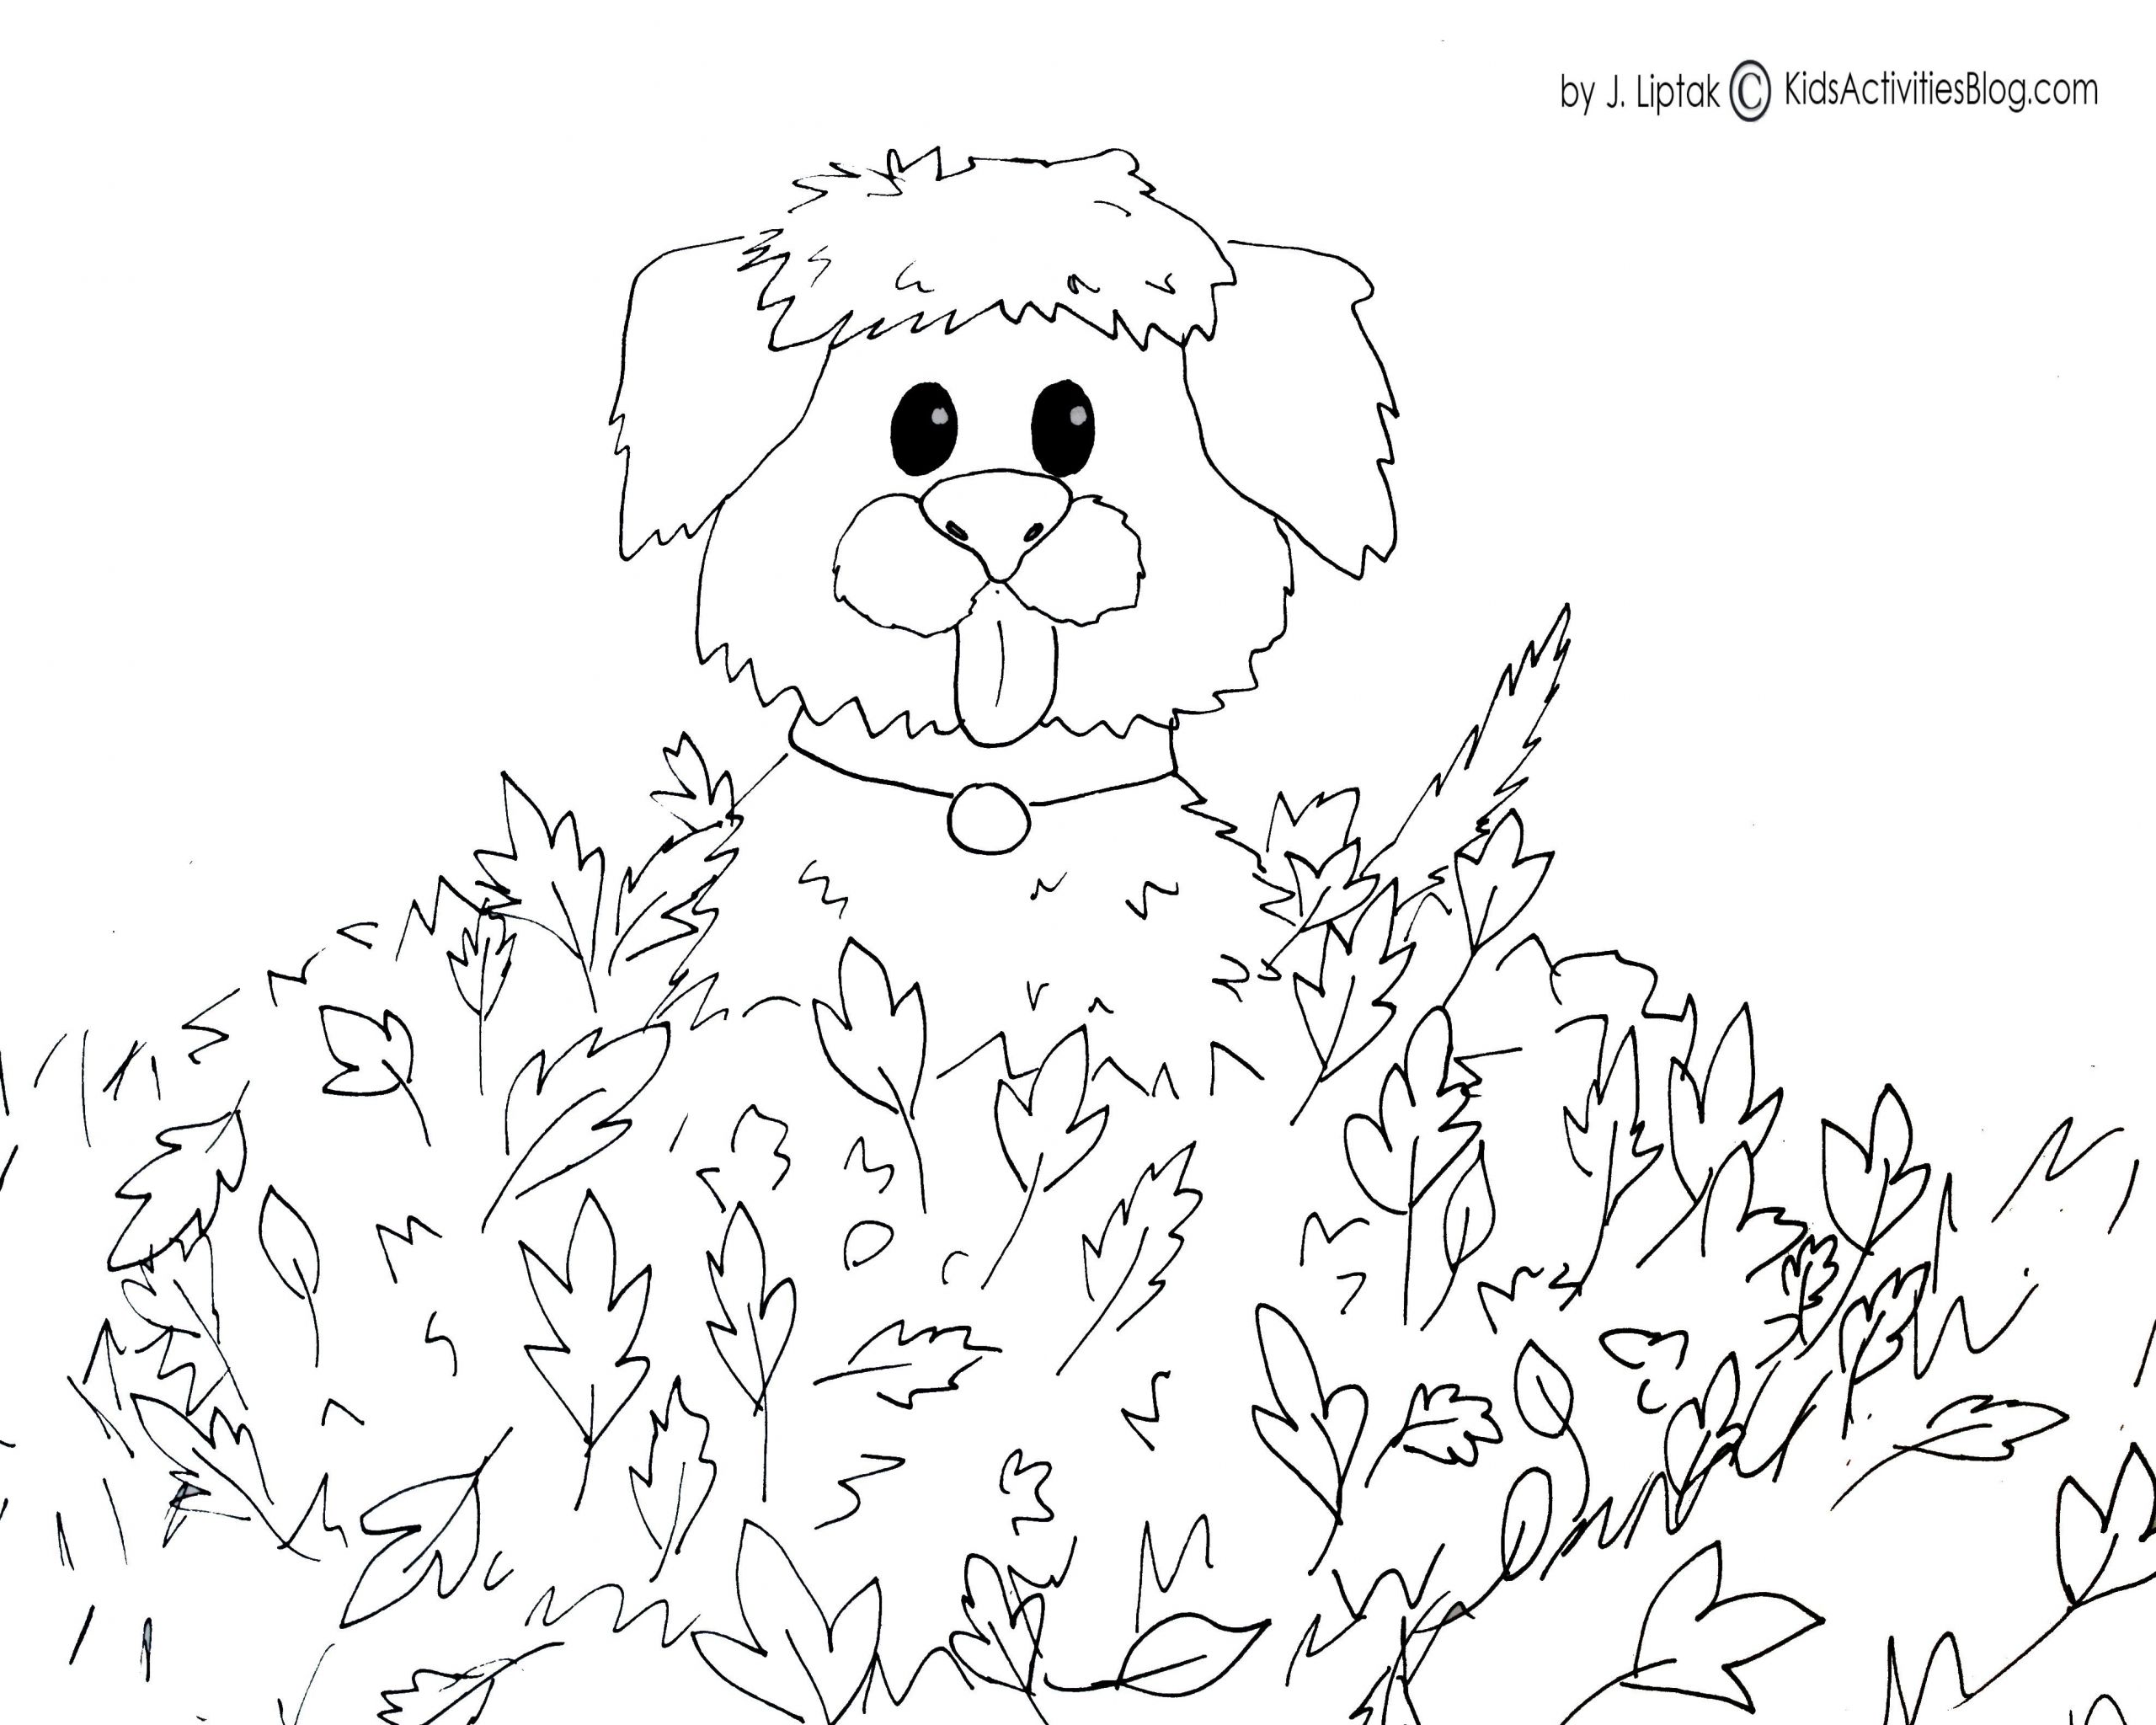 Printable Coloring Pages For Kids Fall
 4 FREE PRINTABLE FALL COLORING PAGES Kids Activities